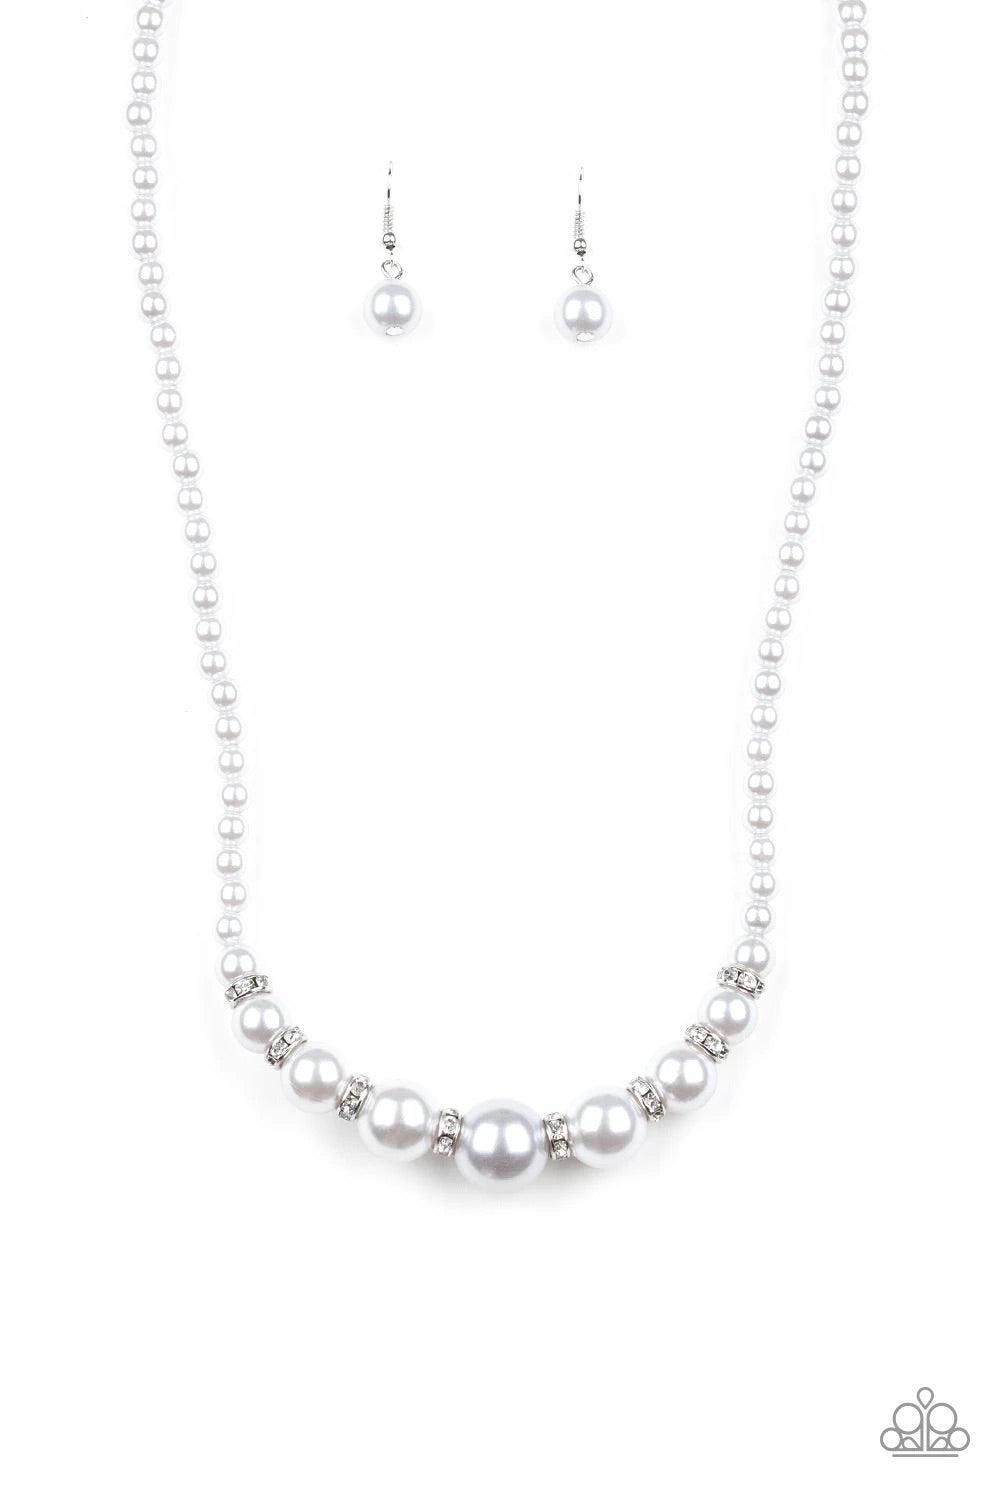 Paparazzi Accessories SoHo Sweetheart - Silver Threaded along an invisible wire, dainty silver pearls give way to an alternating collection of larger silver pearls and white rhinestone encrusted rings below the collar for a timeless sparkle. Features an a